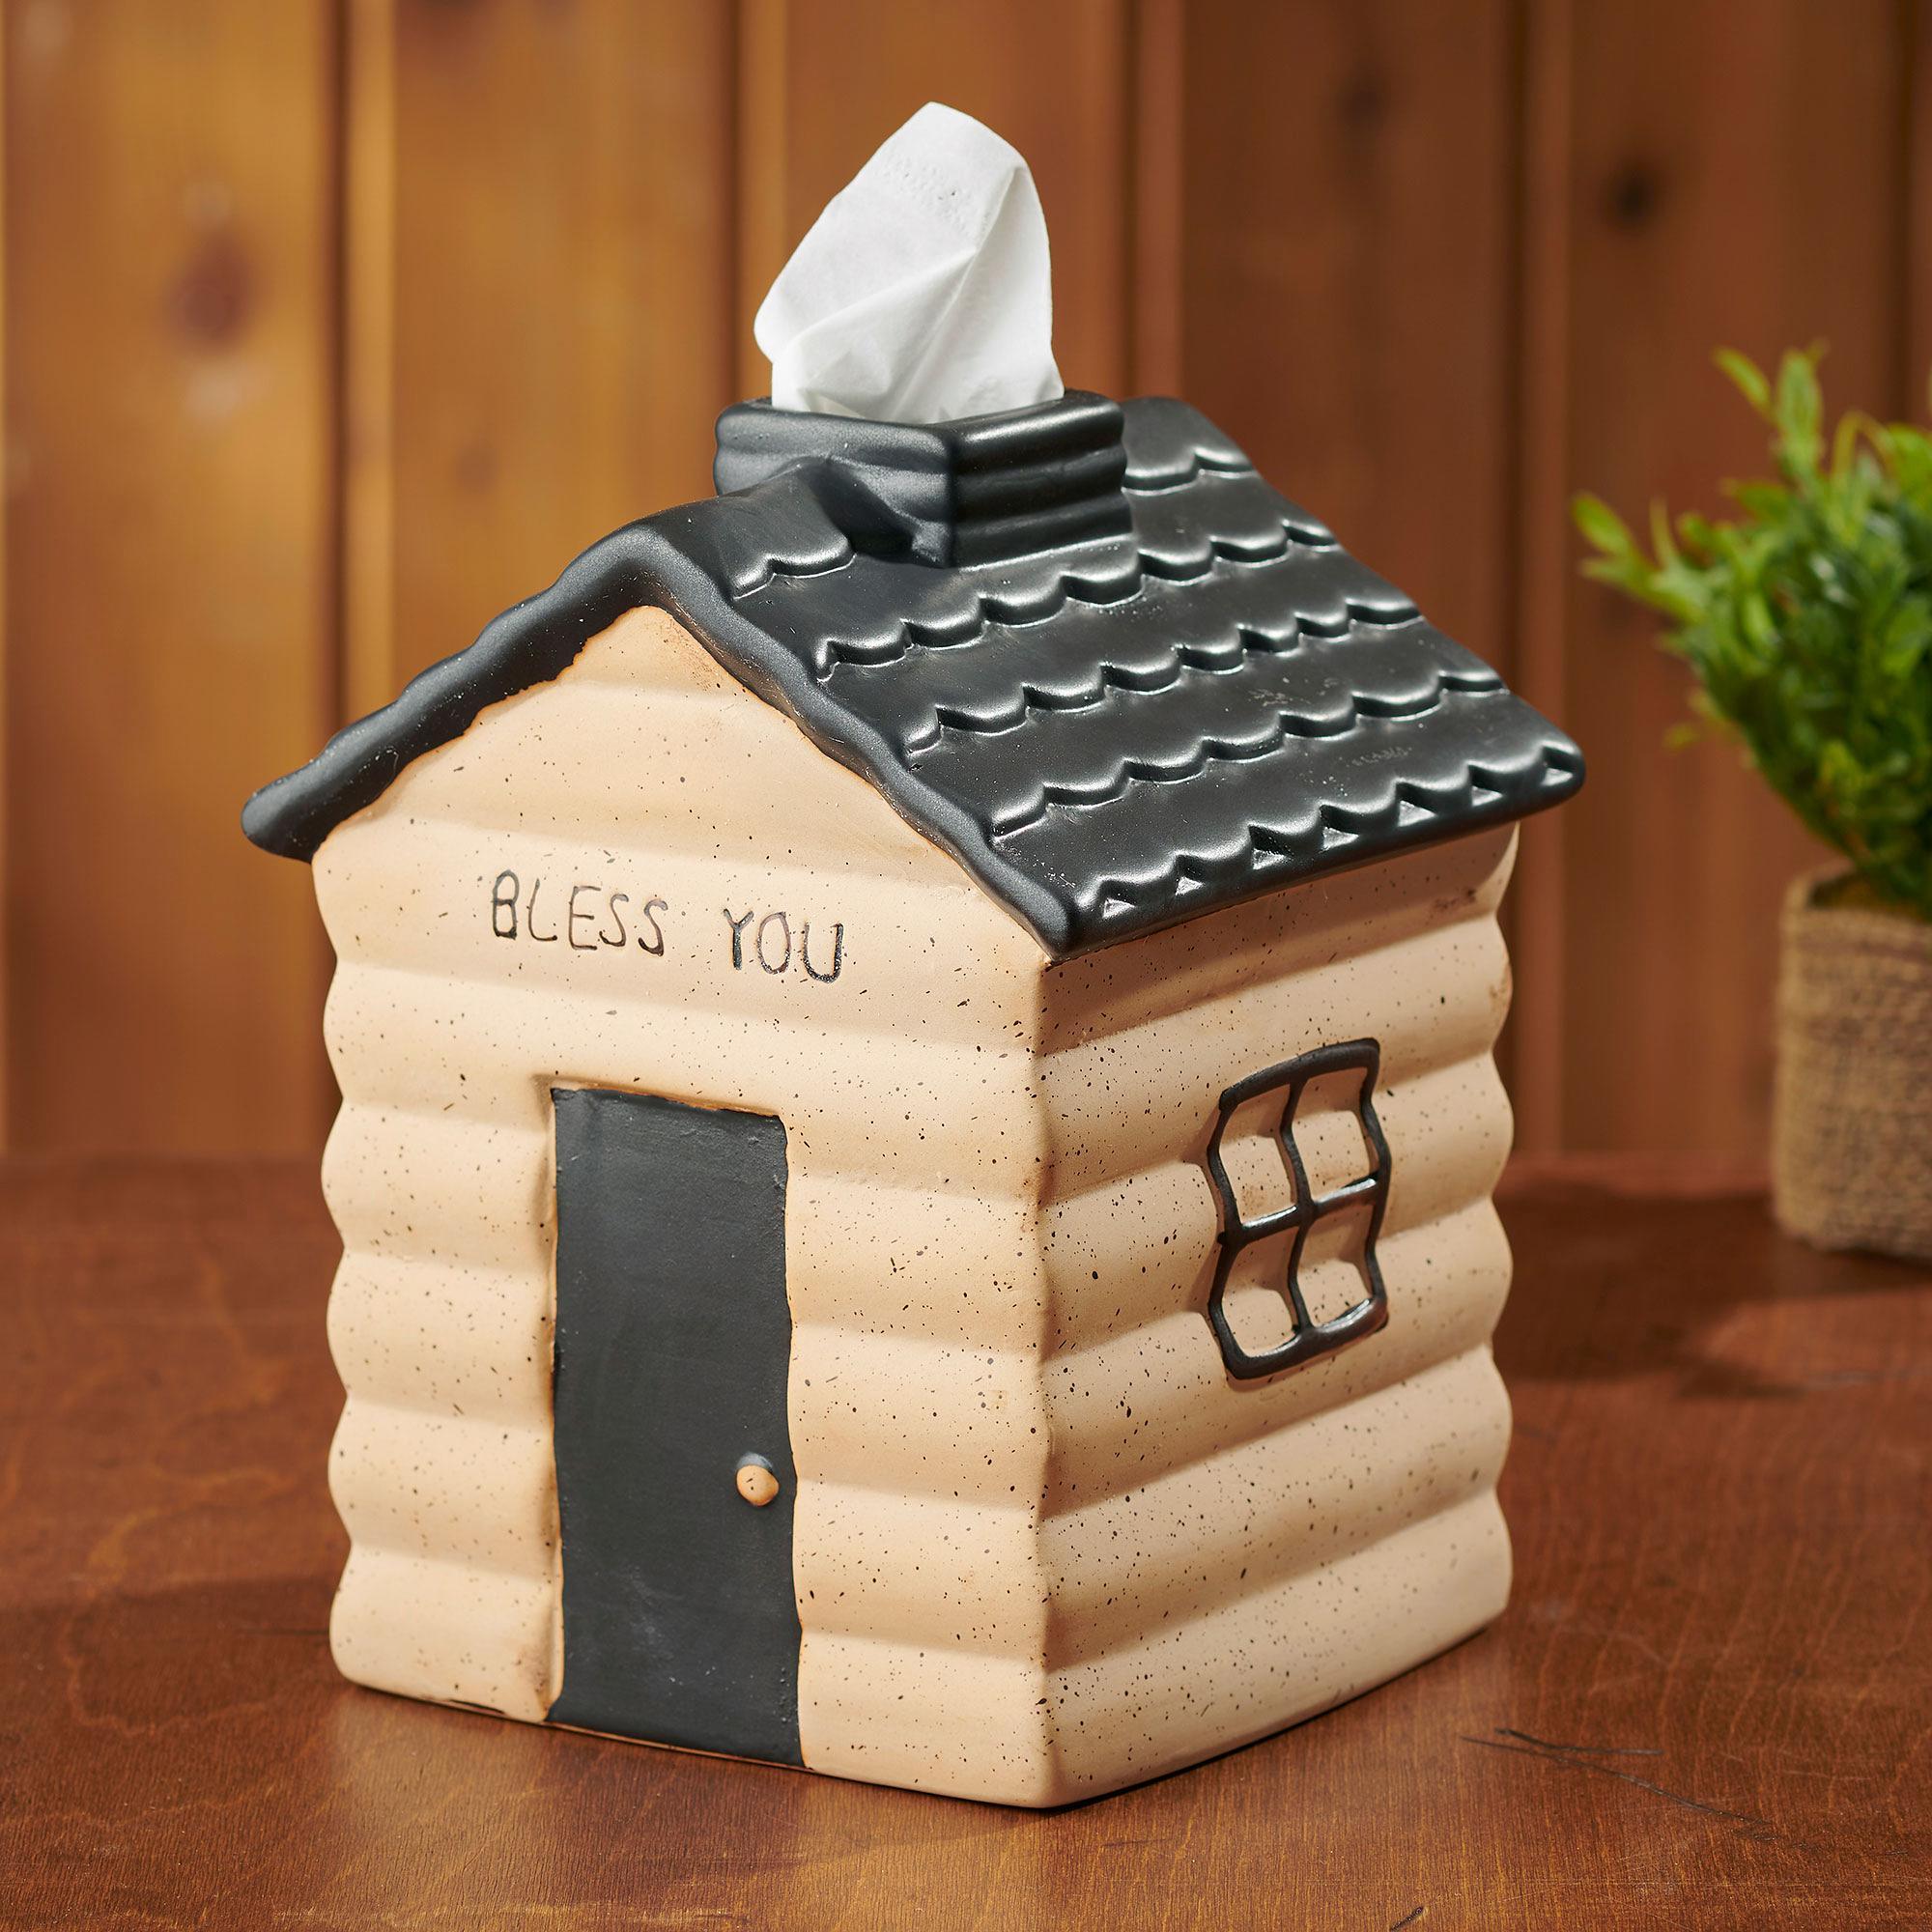 Bless You Log Cabin Tissue Box Cover - Wild Wings